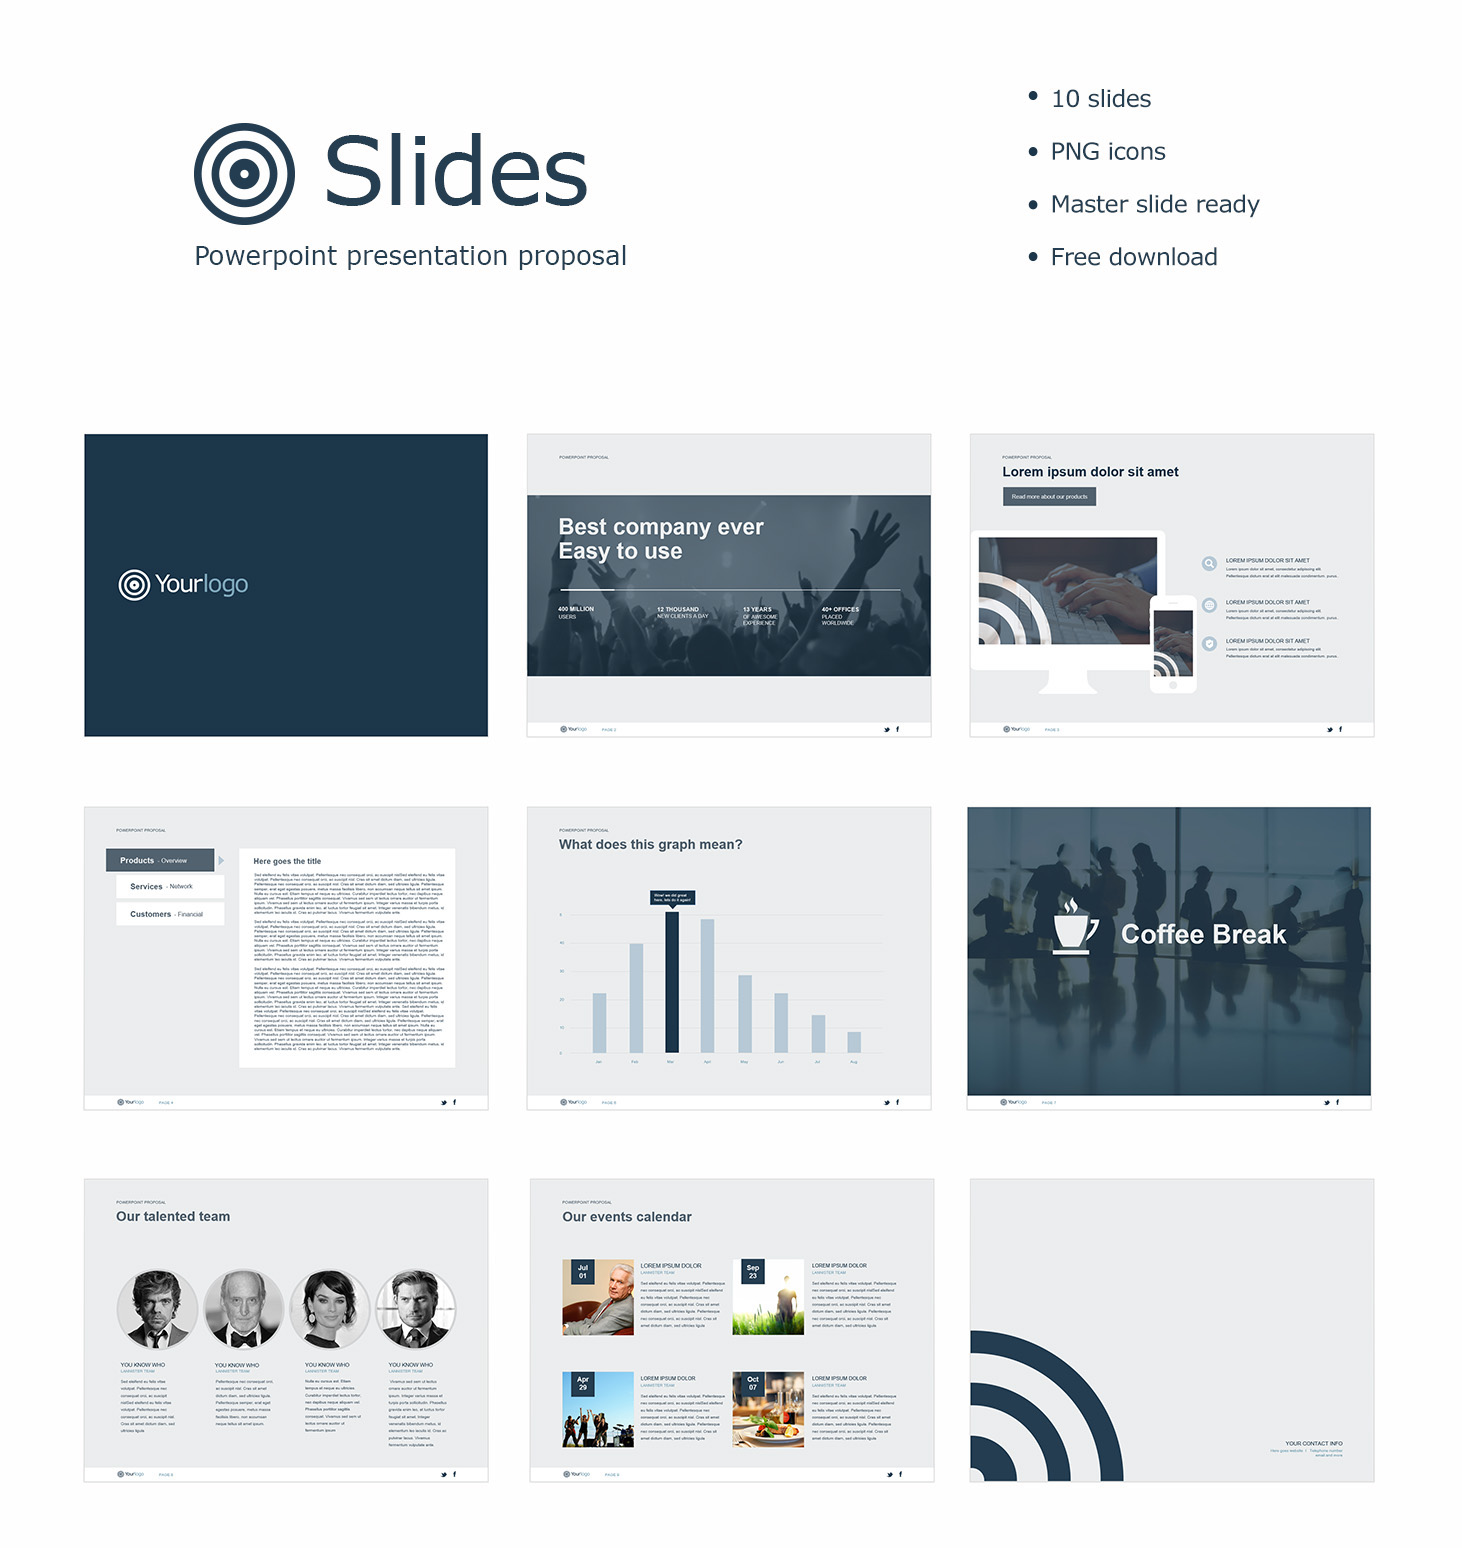 Free Powerpoint Template Downloads